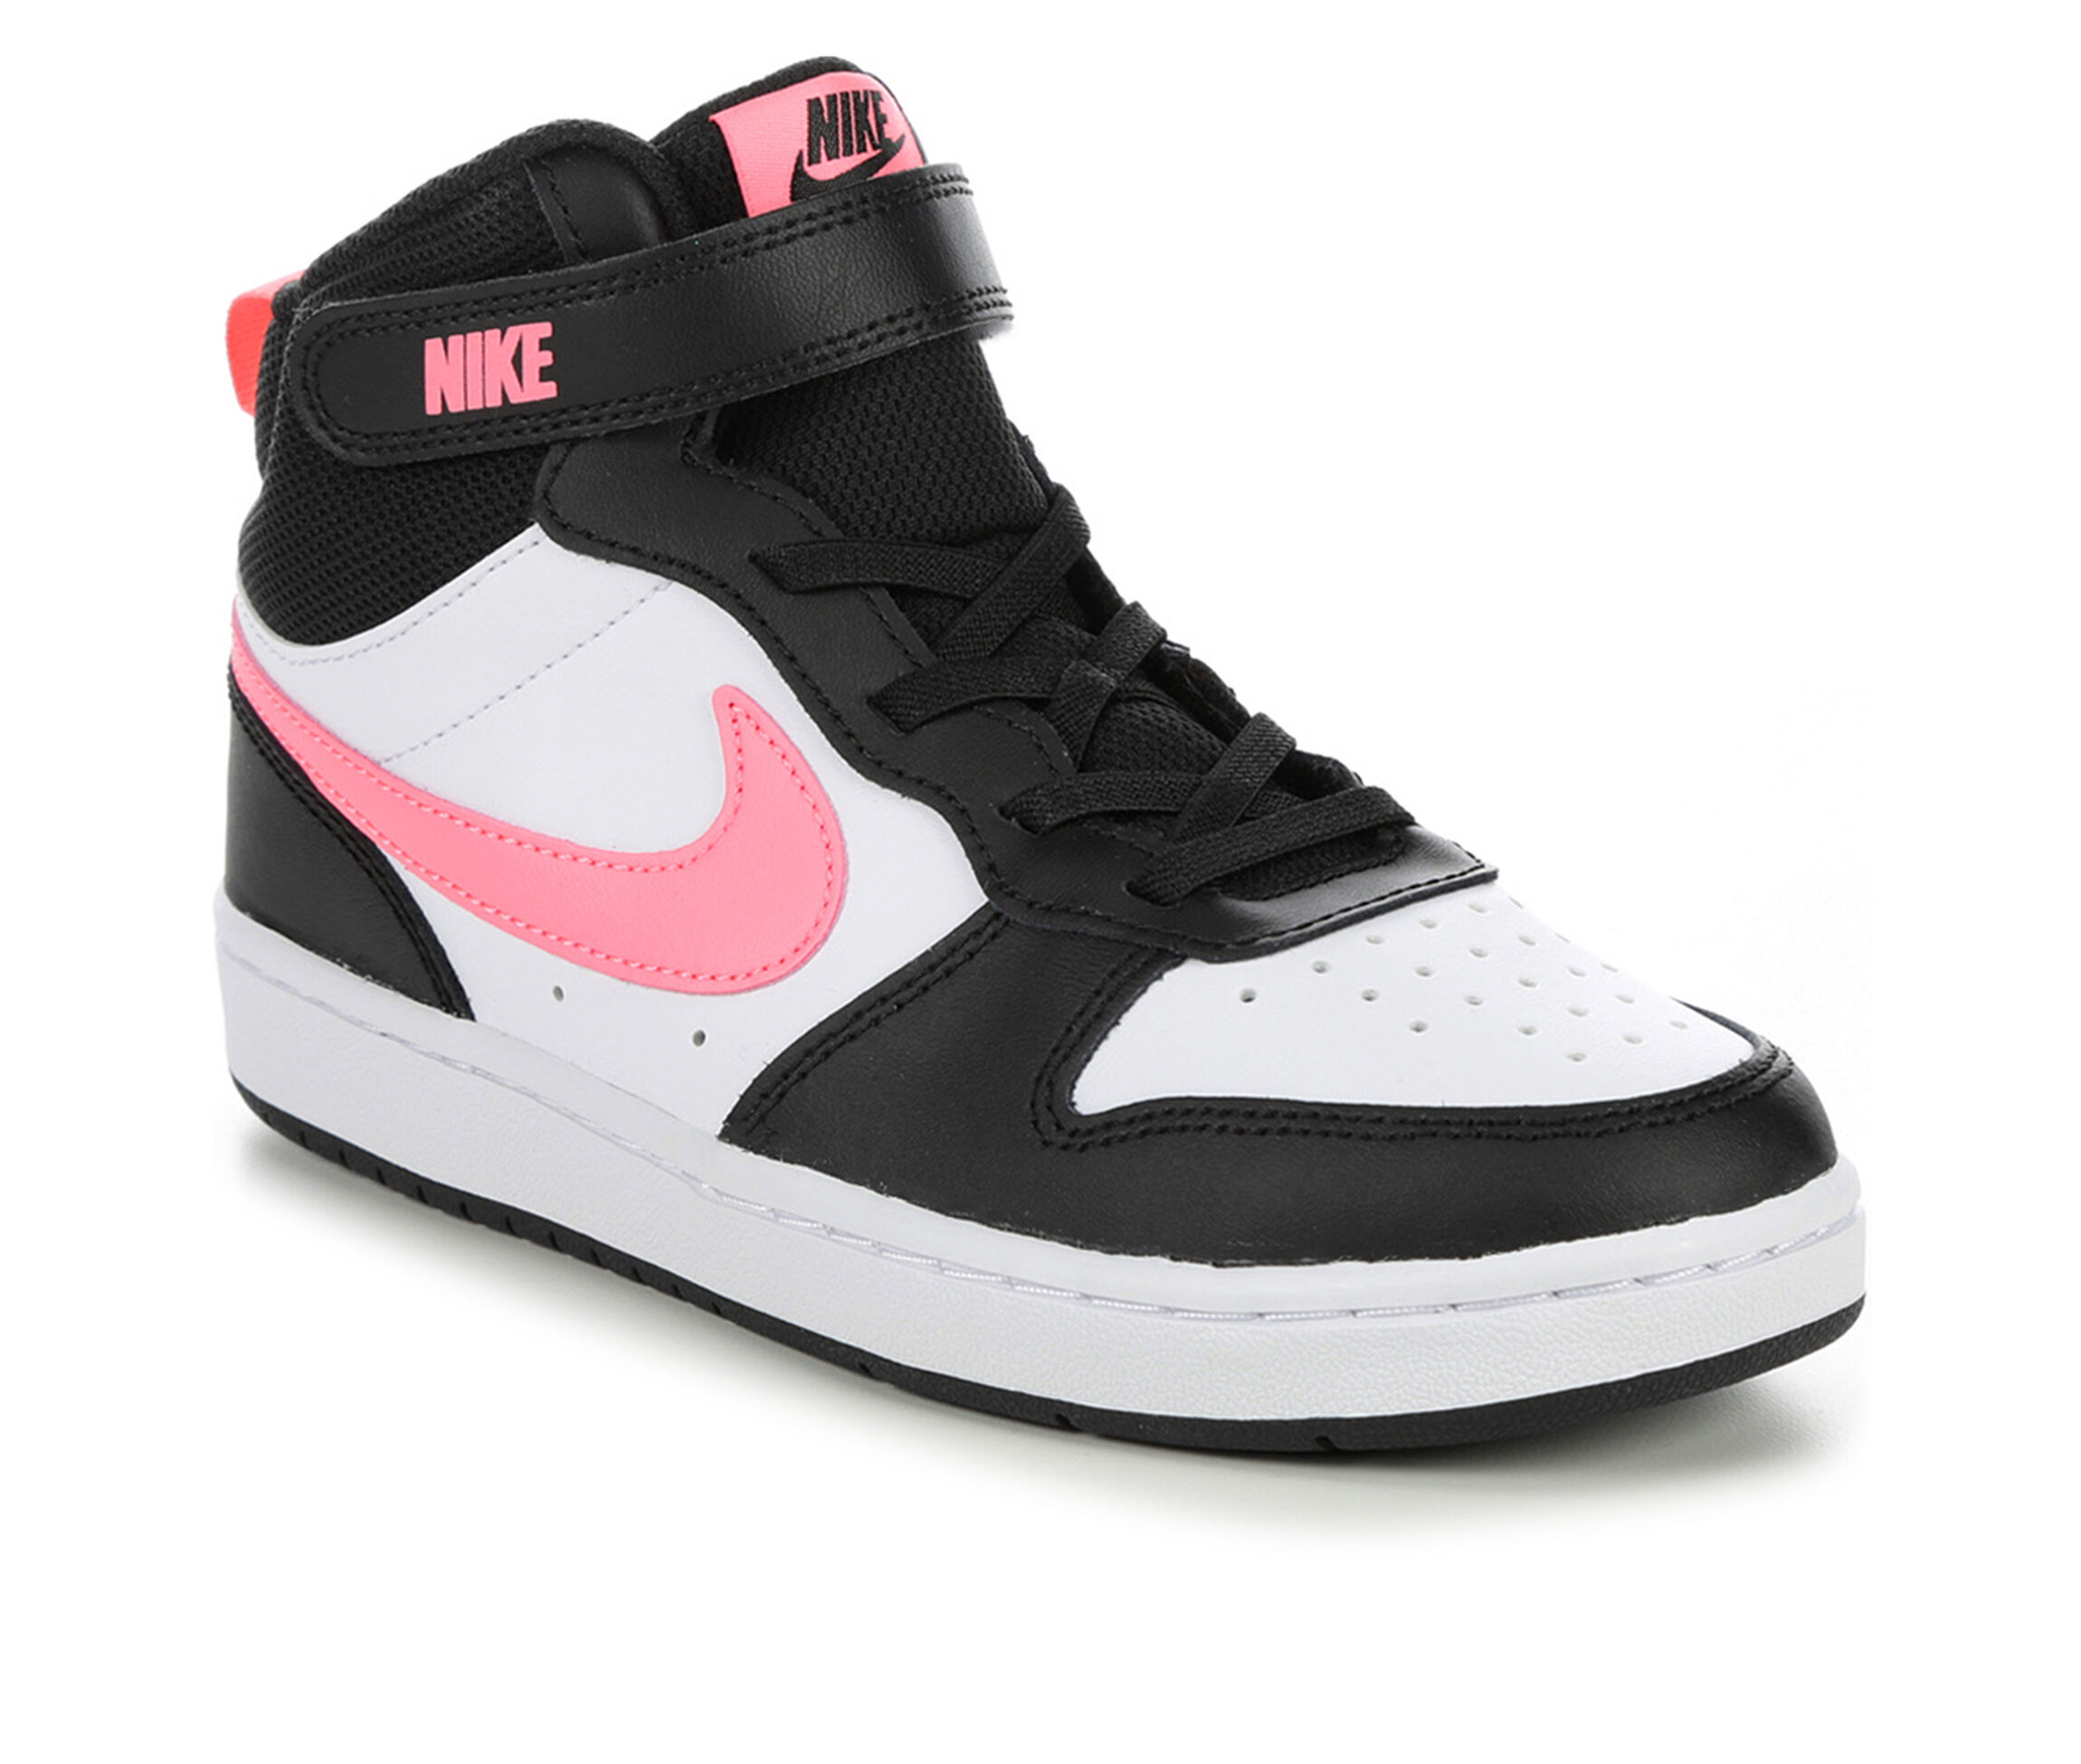 Nike Shoes & Accessories | Shoe Carnival